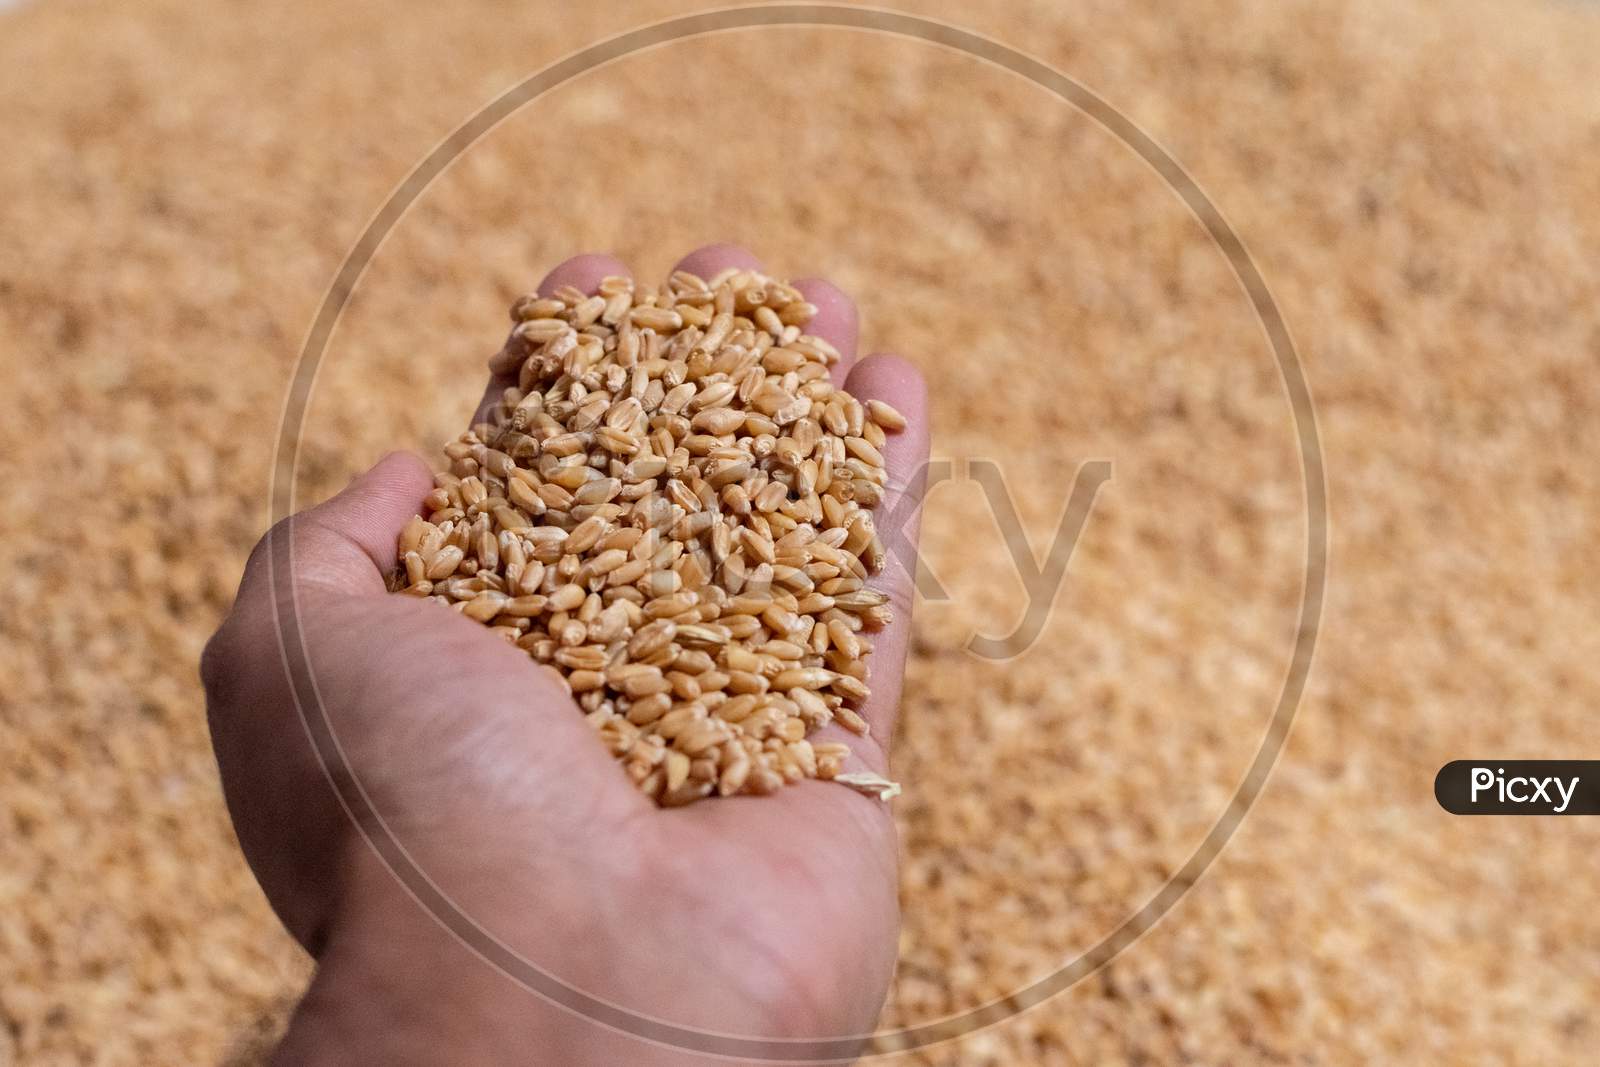 Wheat grains in hand after harvesting and threshing of wheat crop